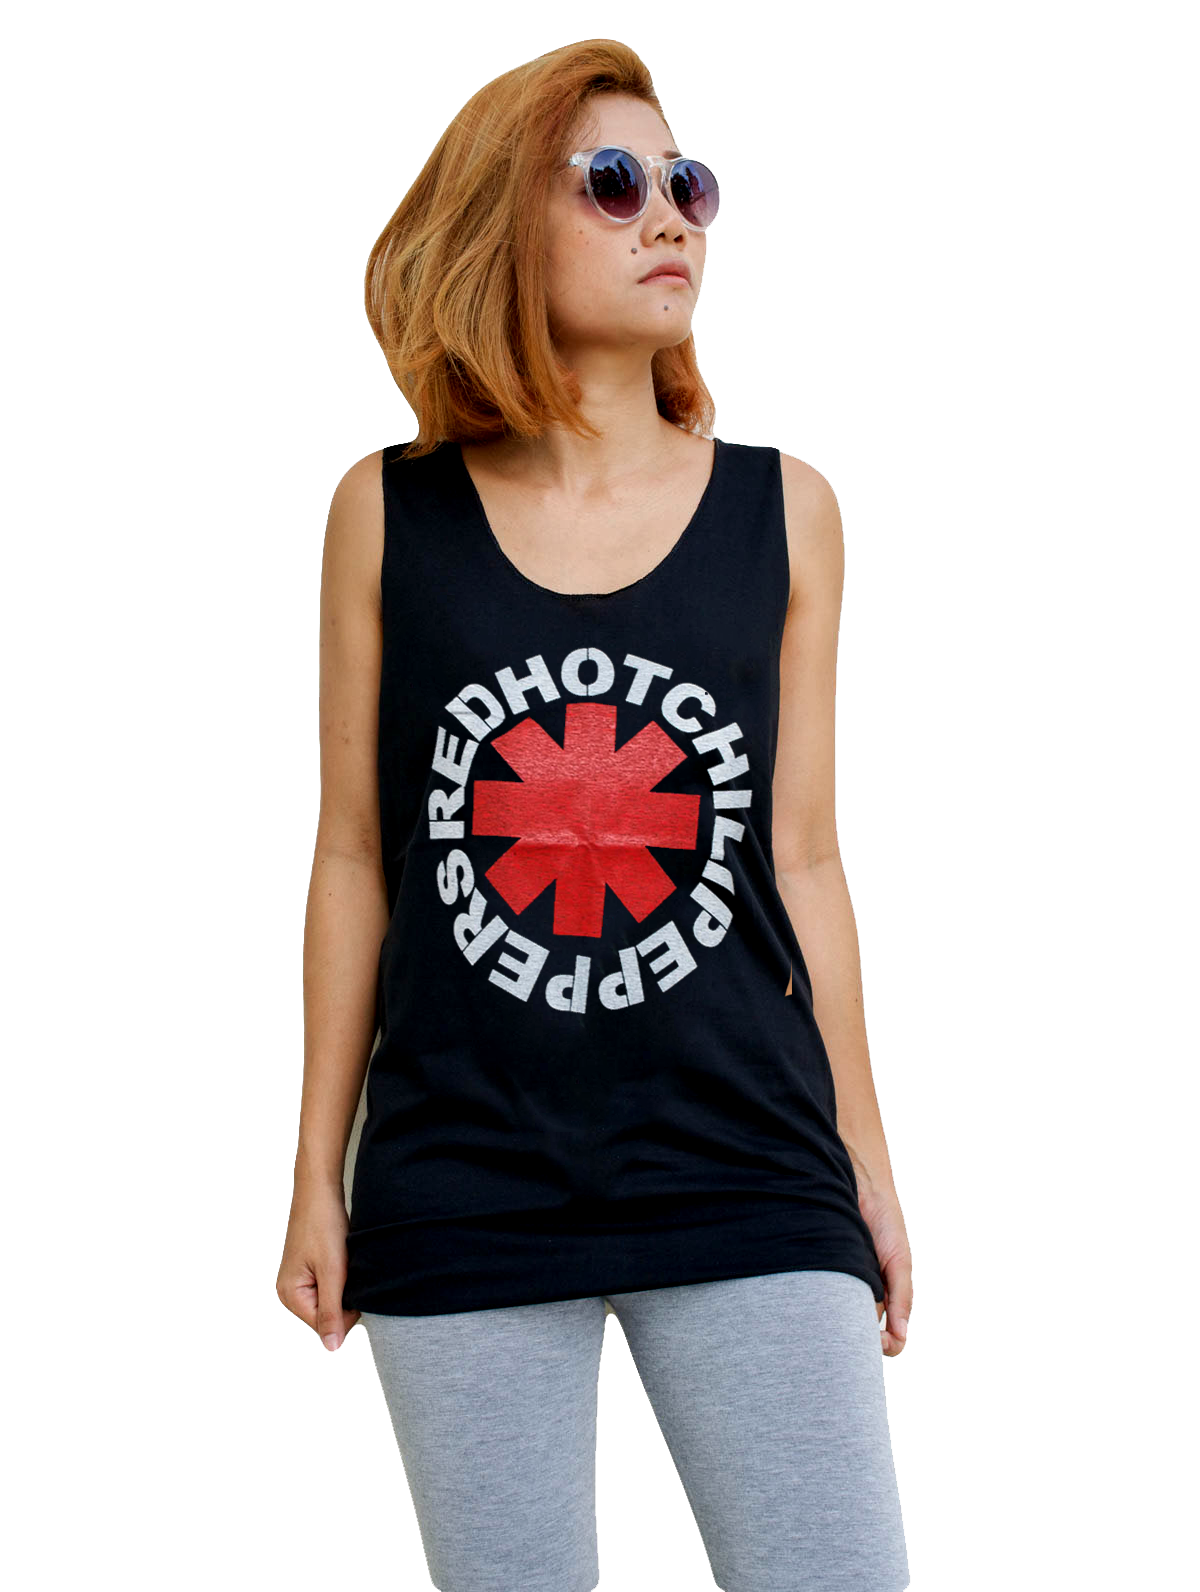 Unisex Red Hot Chili Peppers Tank-Top Singlet vest Sleeveless T-shirt